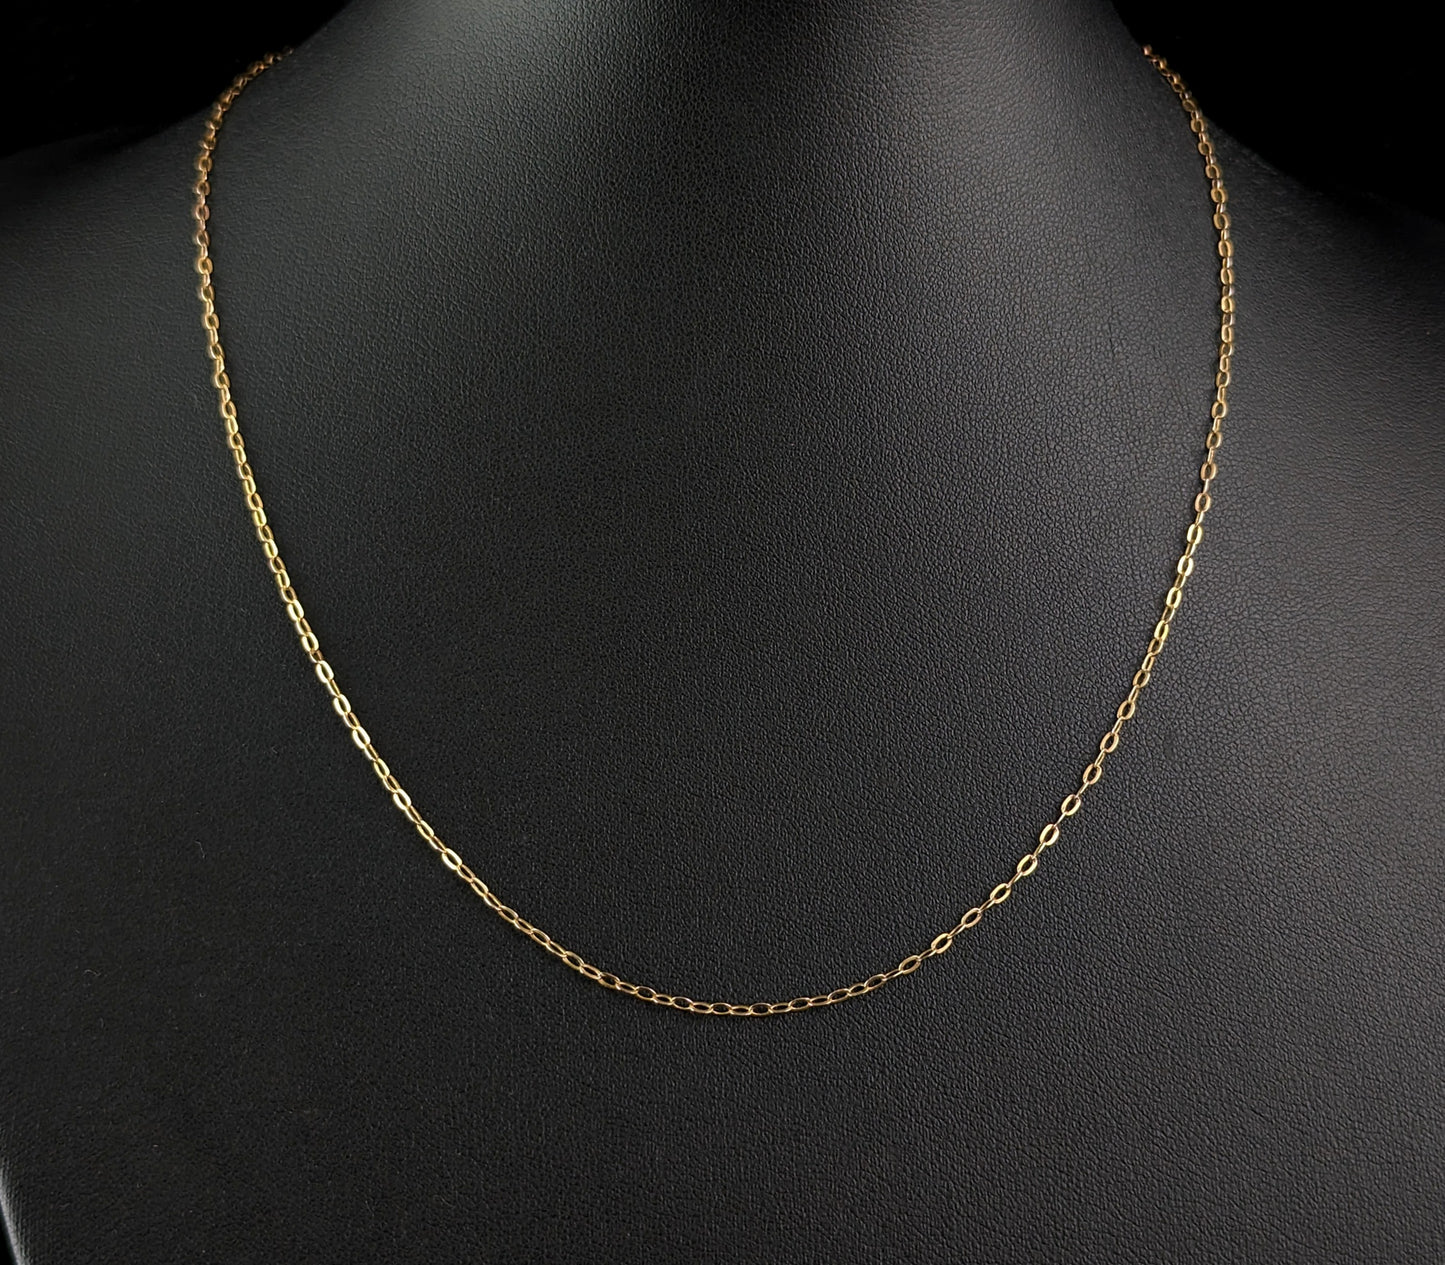 Antique 9ct gold trace link chain necklace, Edwardian